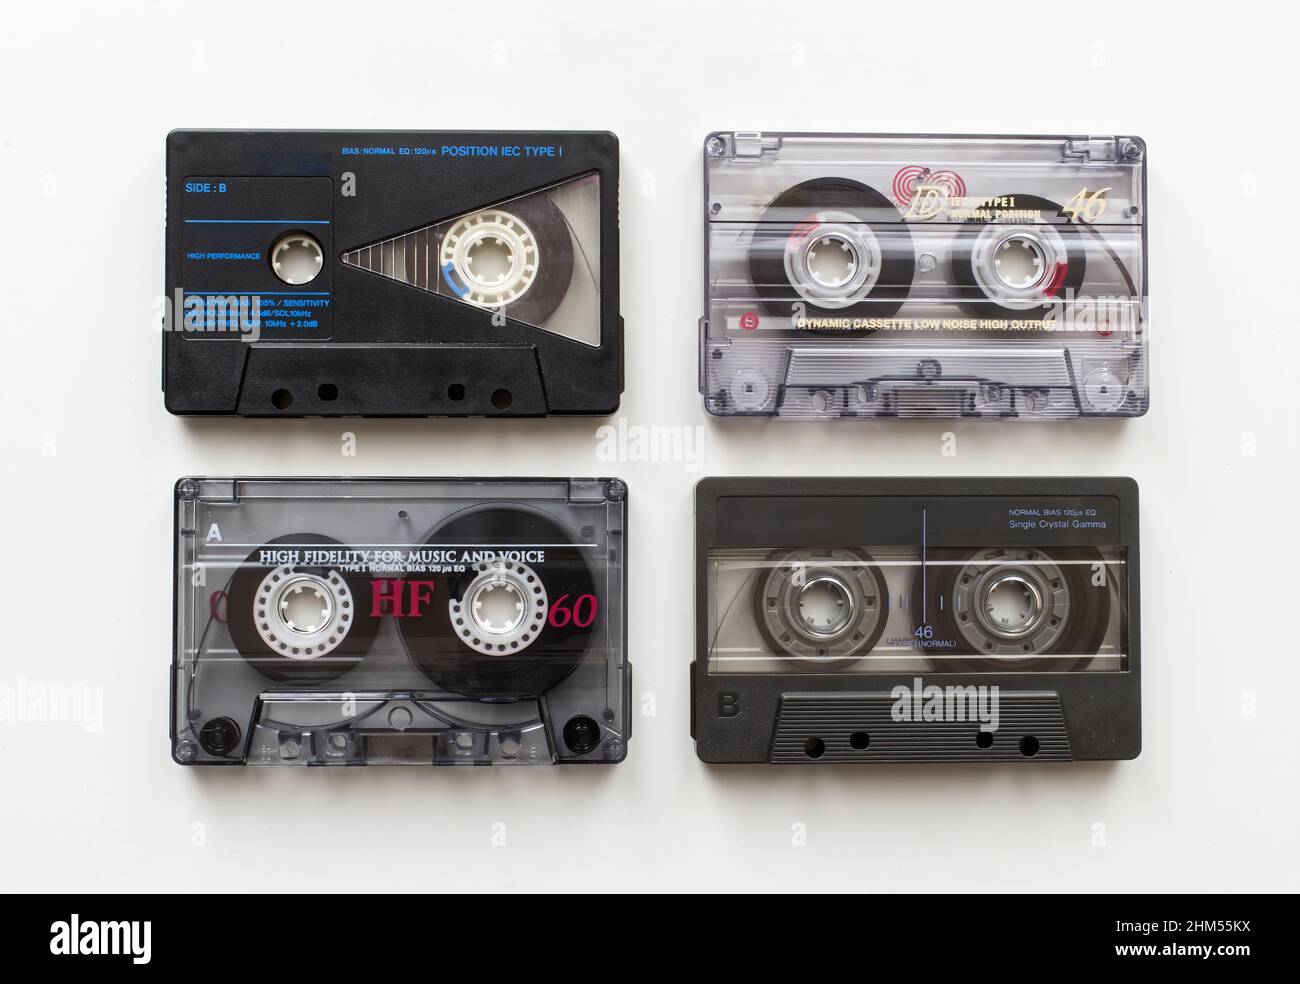 Audio Cassette Tape for home recording. Technology from the 90s. Vintage  Audio Cassette Tape Stock Photo - Alamy